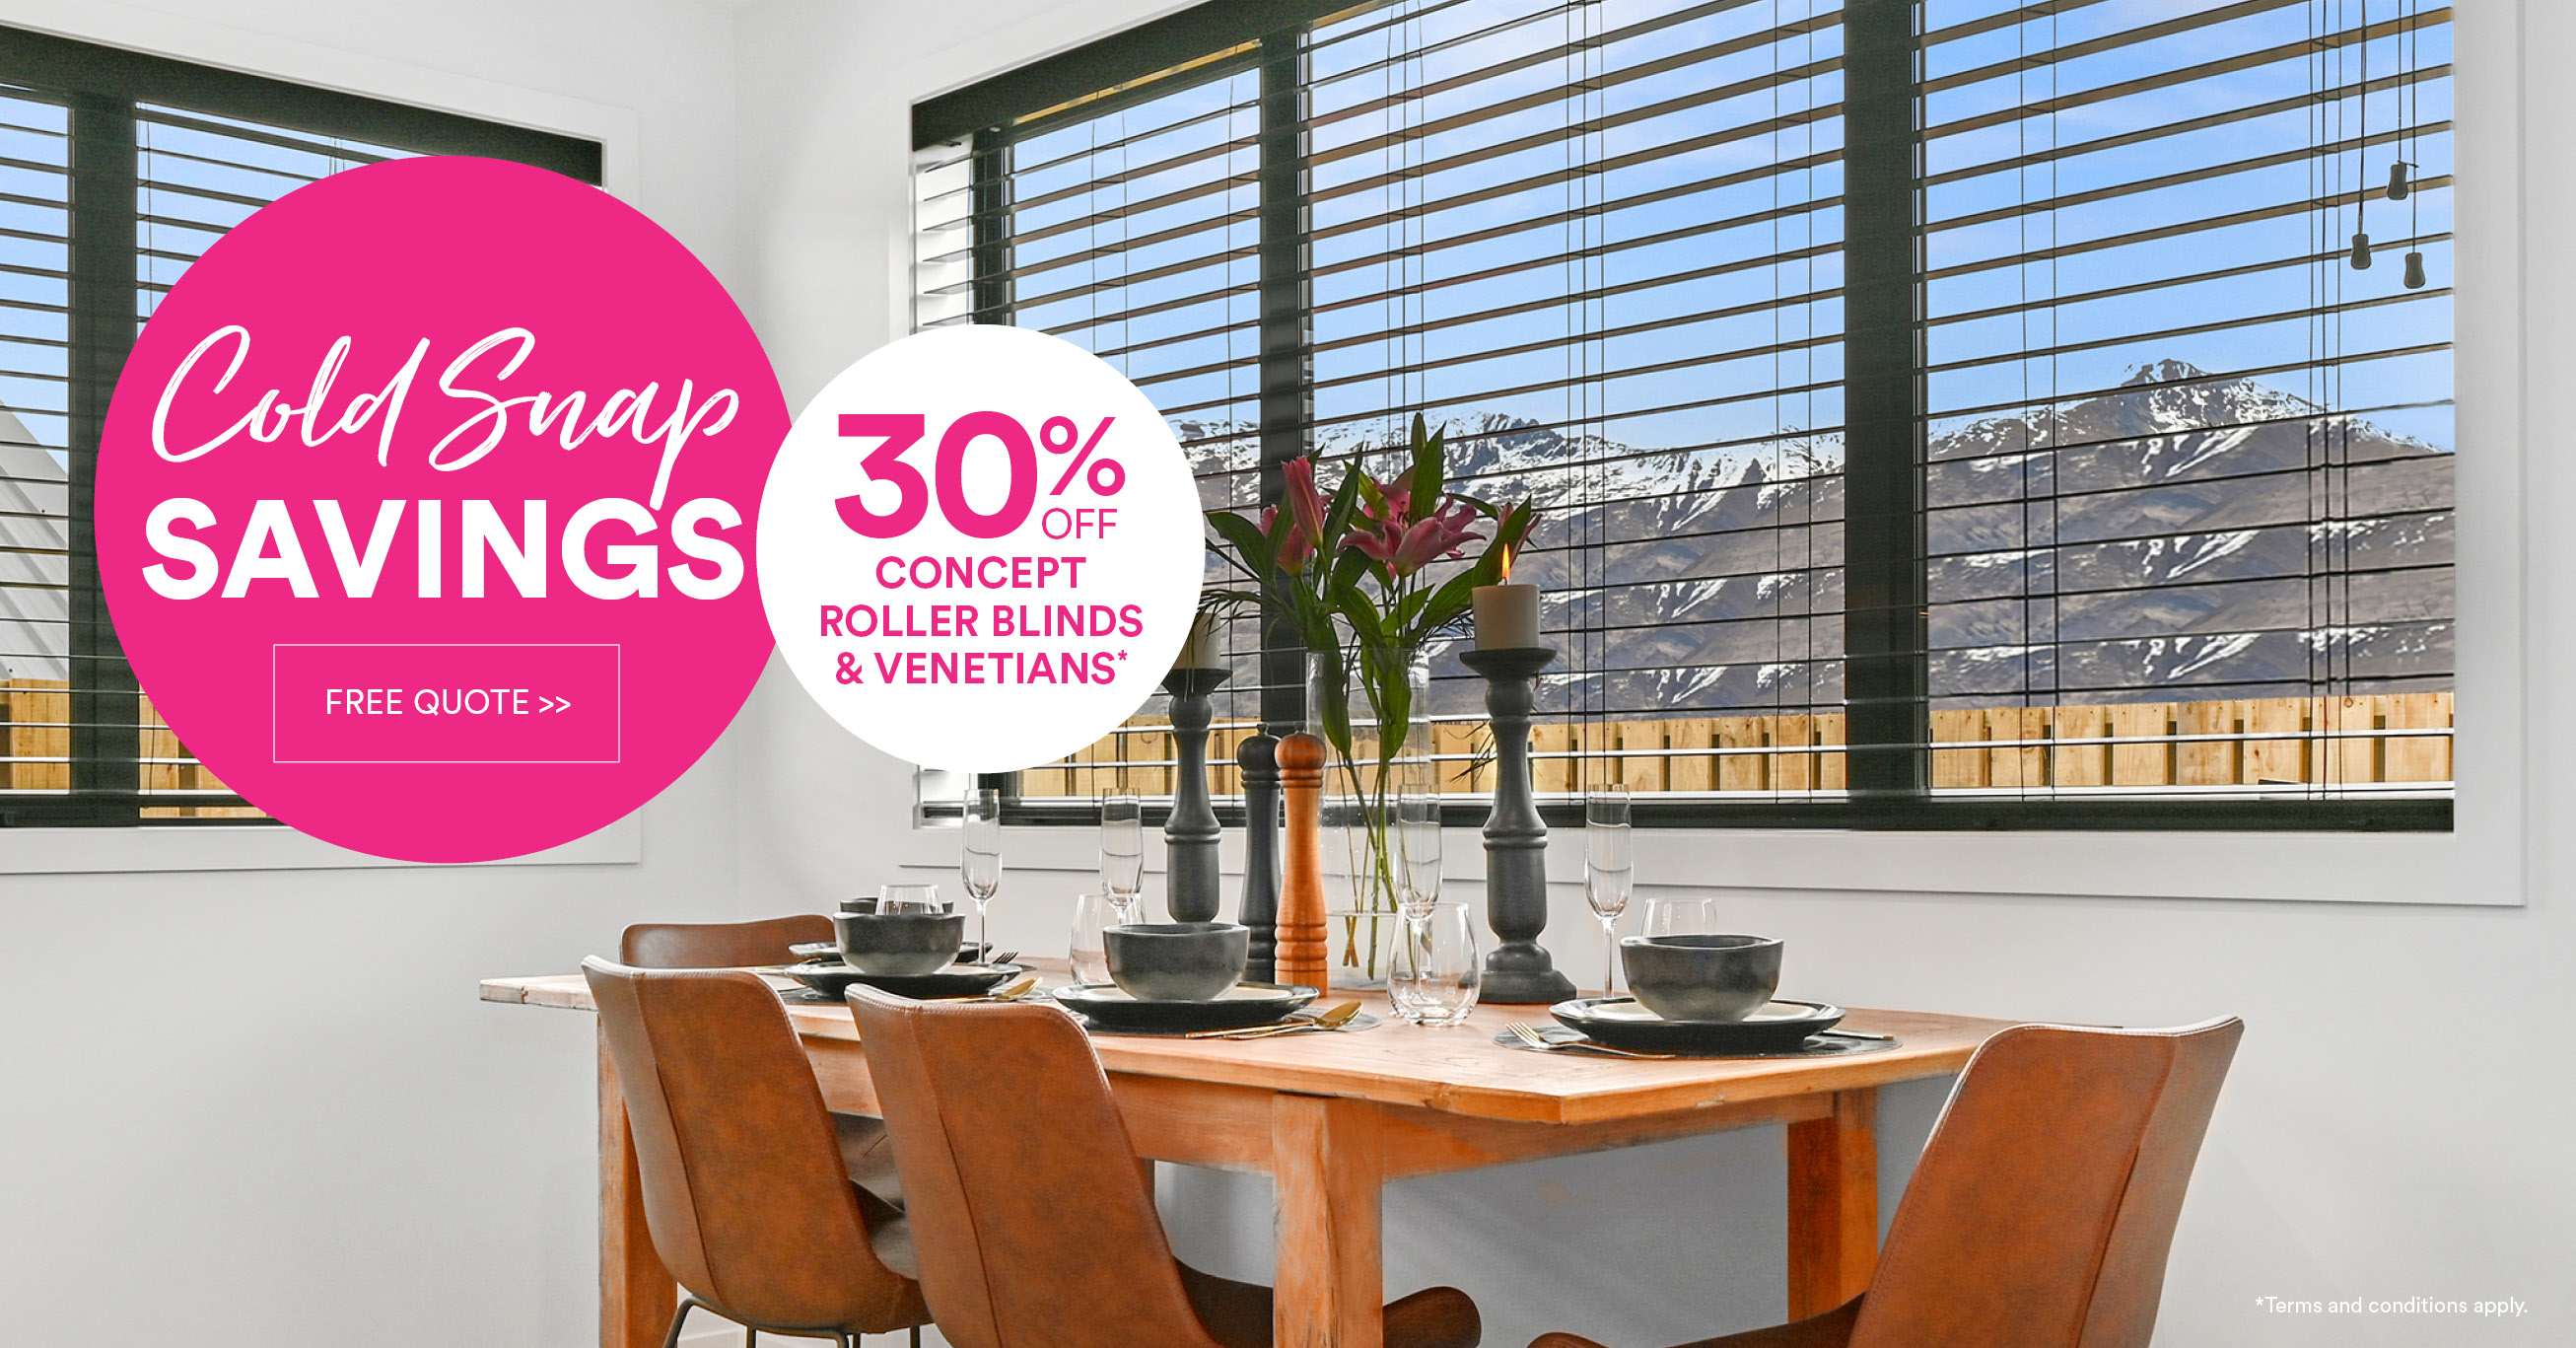 30% off Concept Rollers and Venetians*